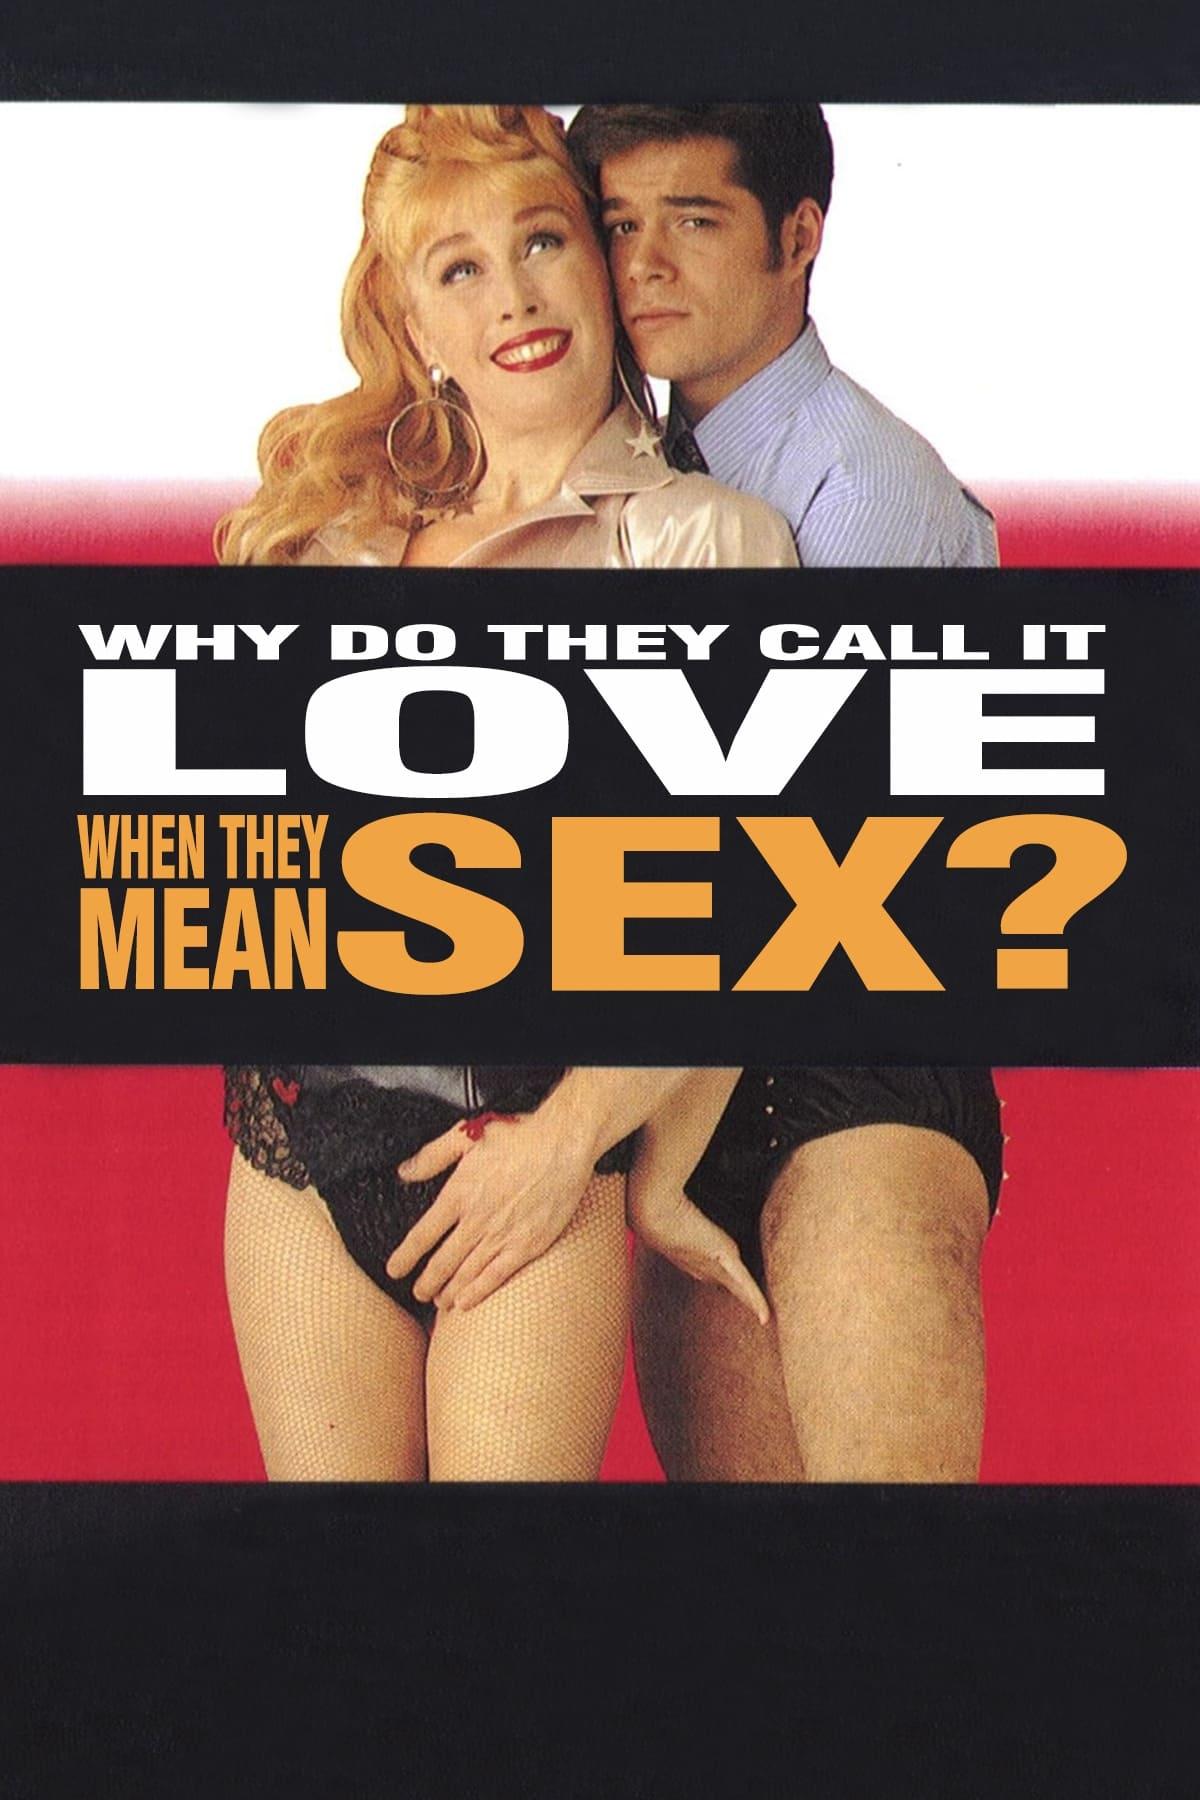 Why Do They Call It Love When They Mean Sex? poster